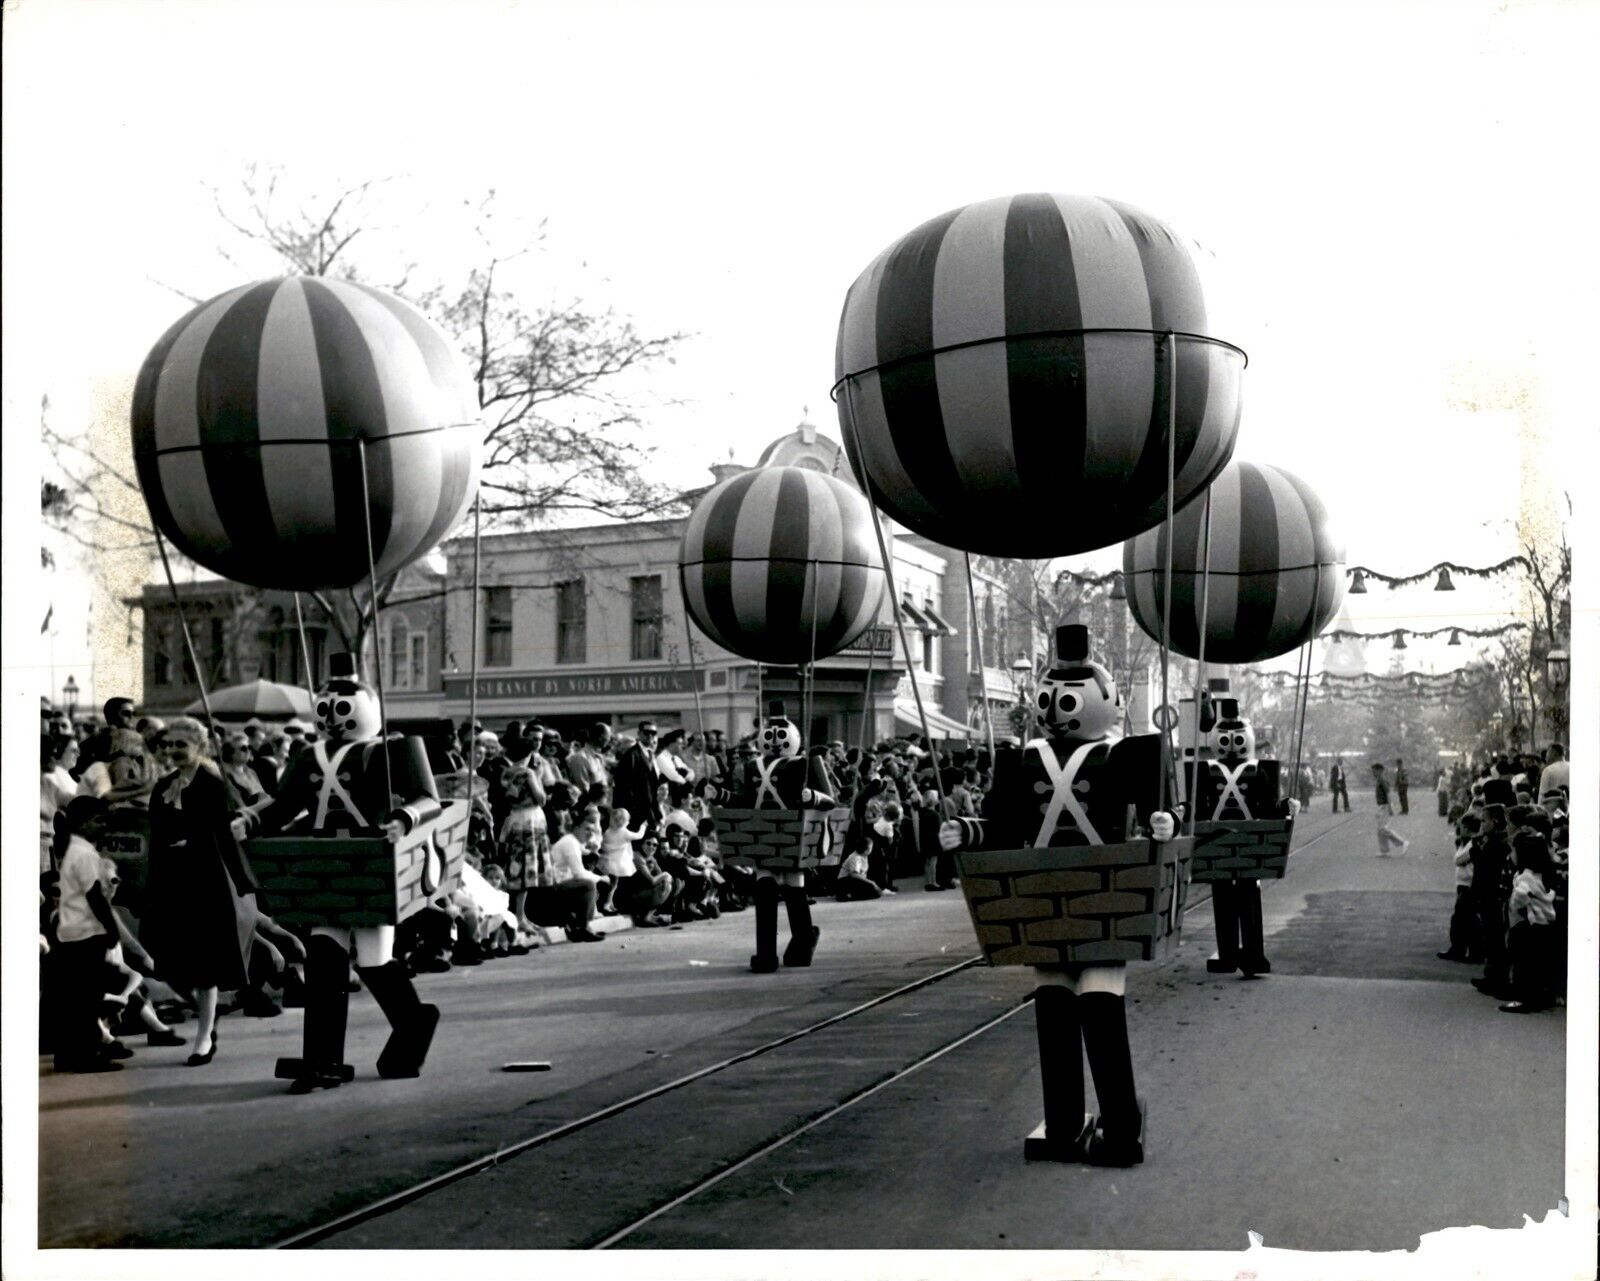 LG936 Orig Photo DISNEYLAND PARADE OF TOYS WOODEN SOLDIERS MARCH FRENCH BALLOONS